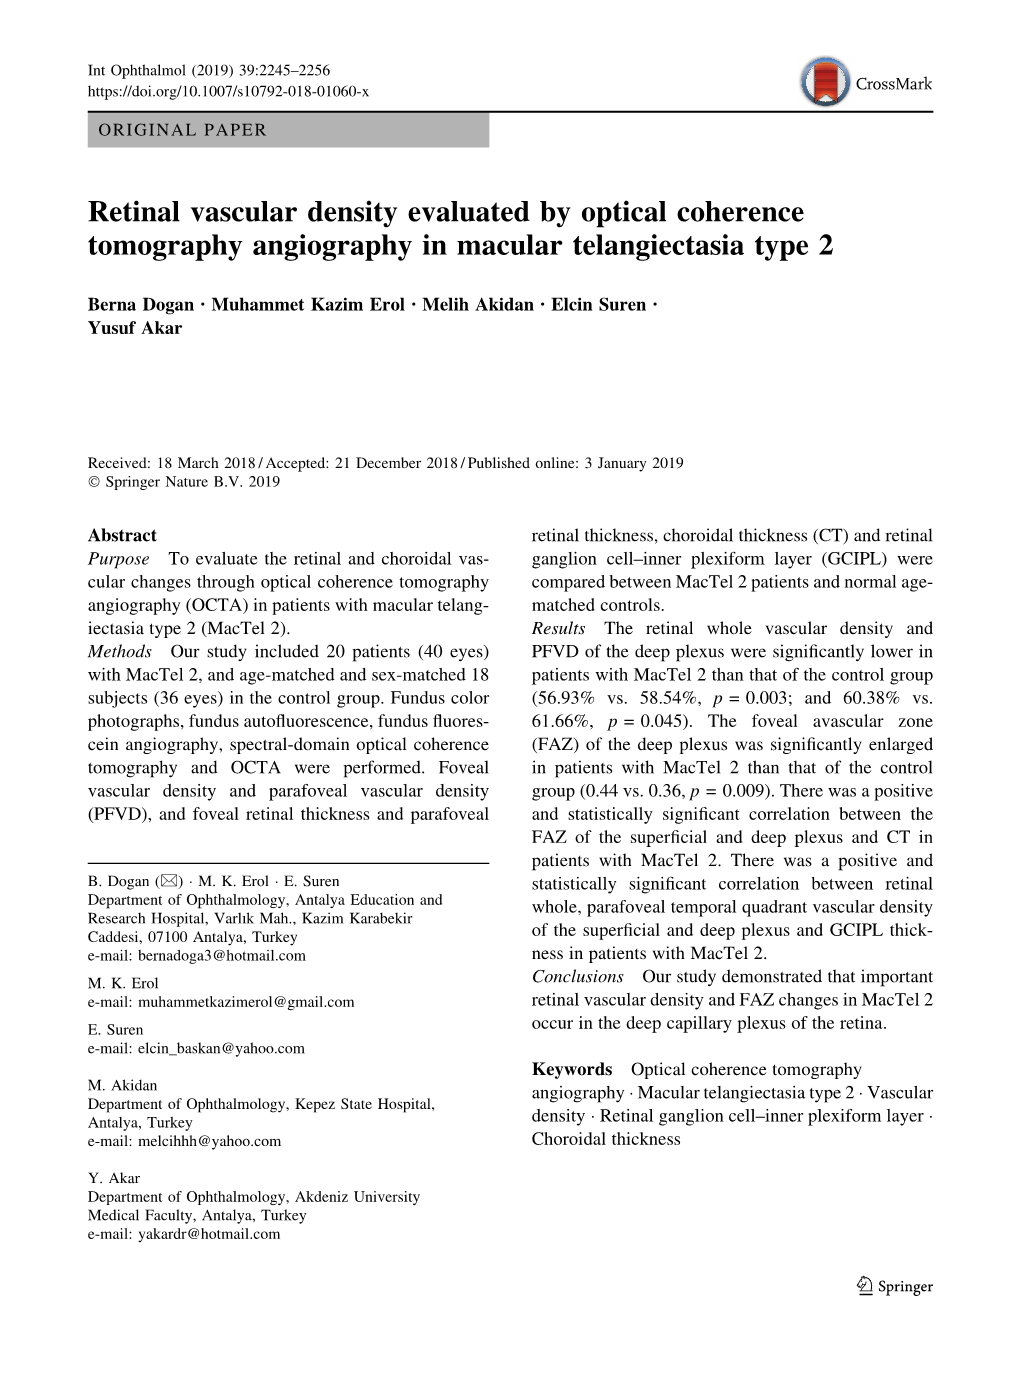 Retinal Vascular Density Evaluated by Optical Coherence Tomography Angiography in Macular Telangiectasia Type 2